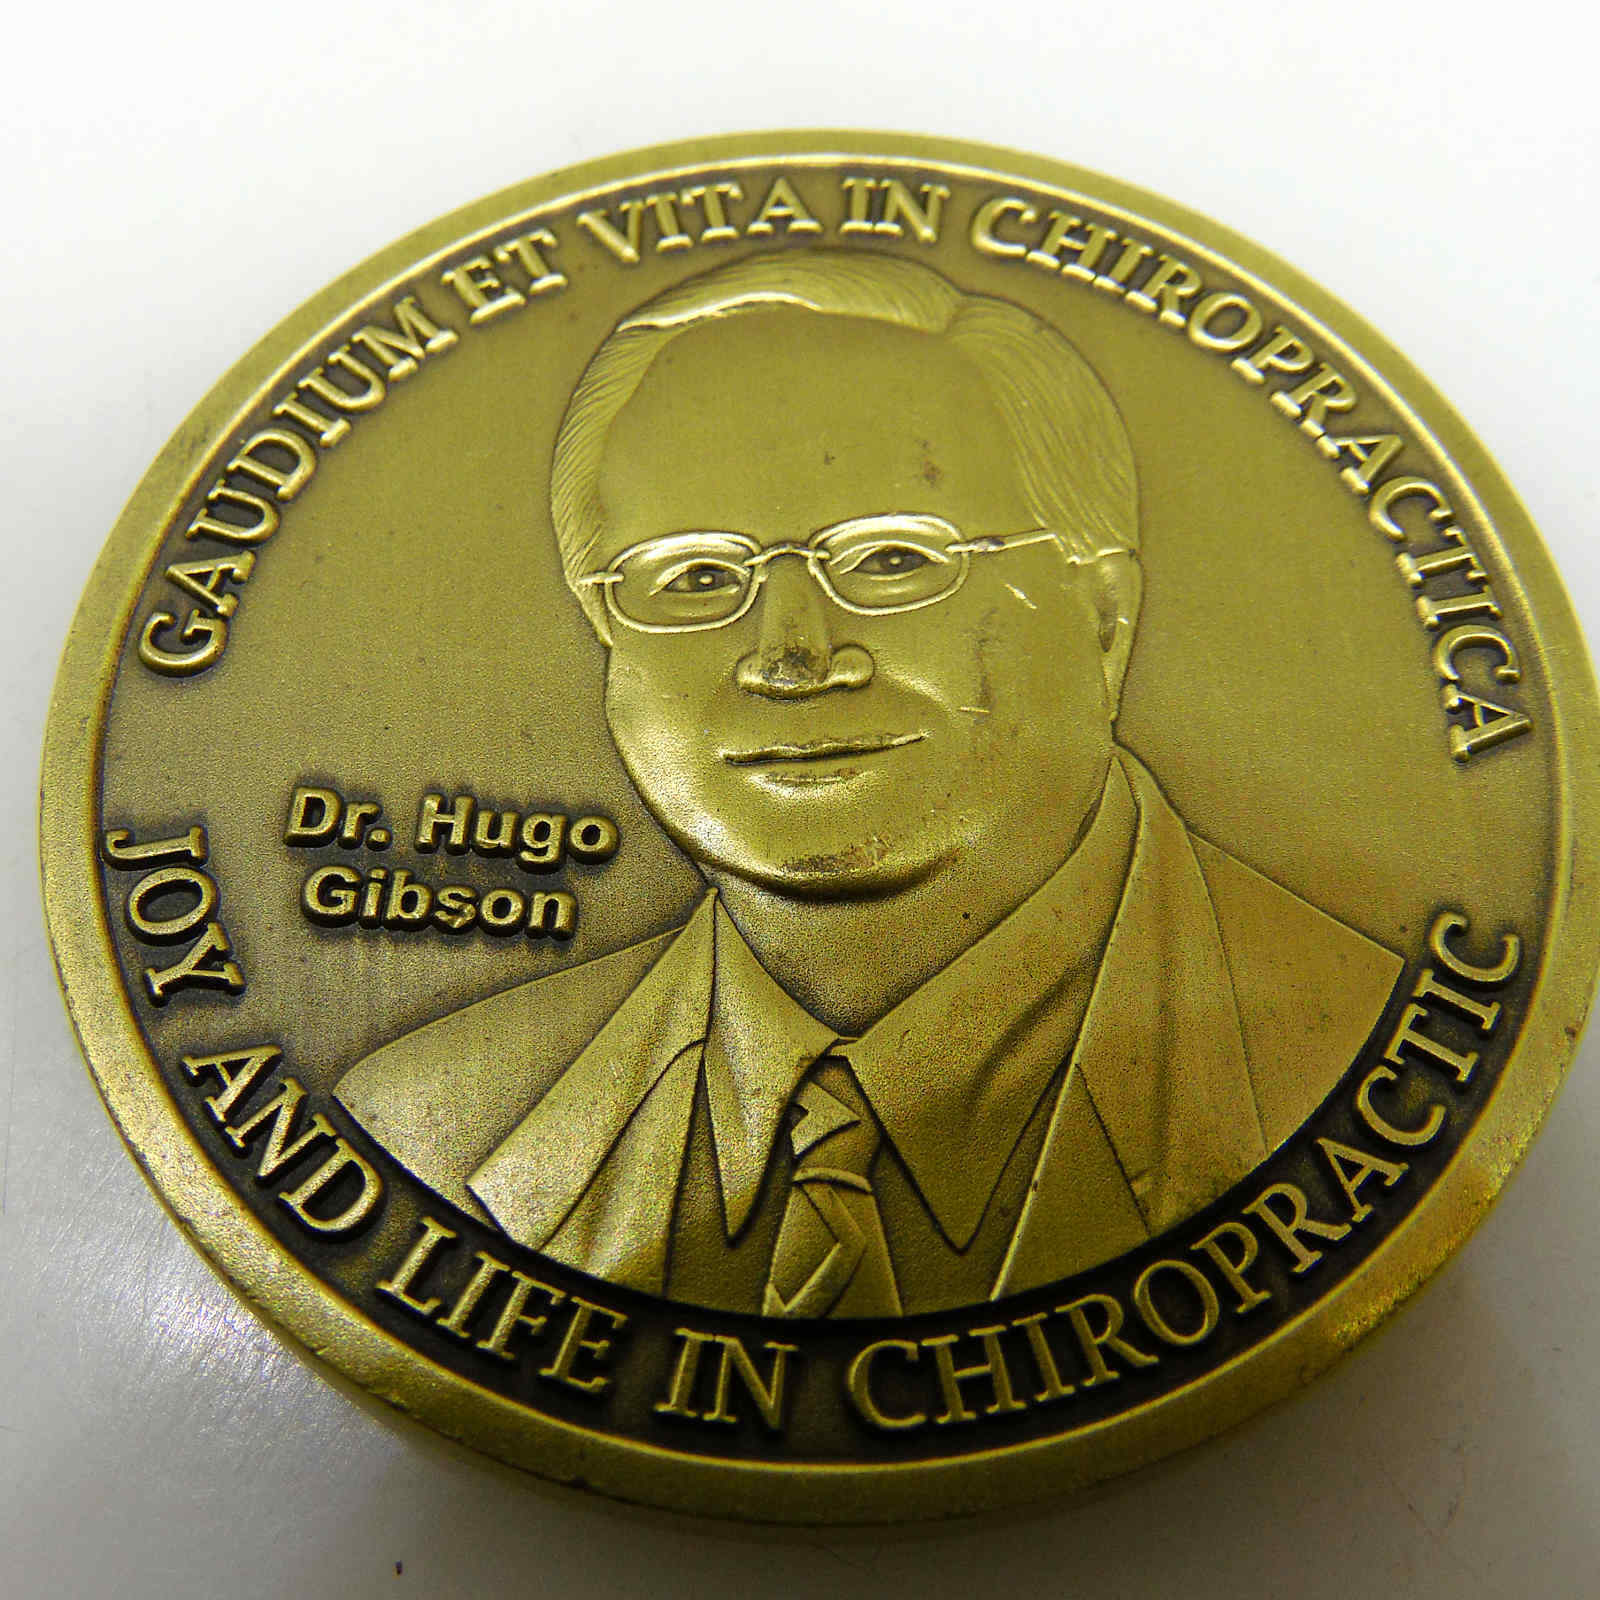 DR HUGO GIBSON TRUTH IN CHIROPRACTIC CHALLENGE COIN